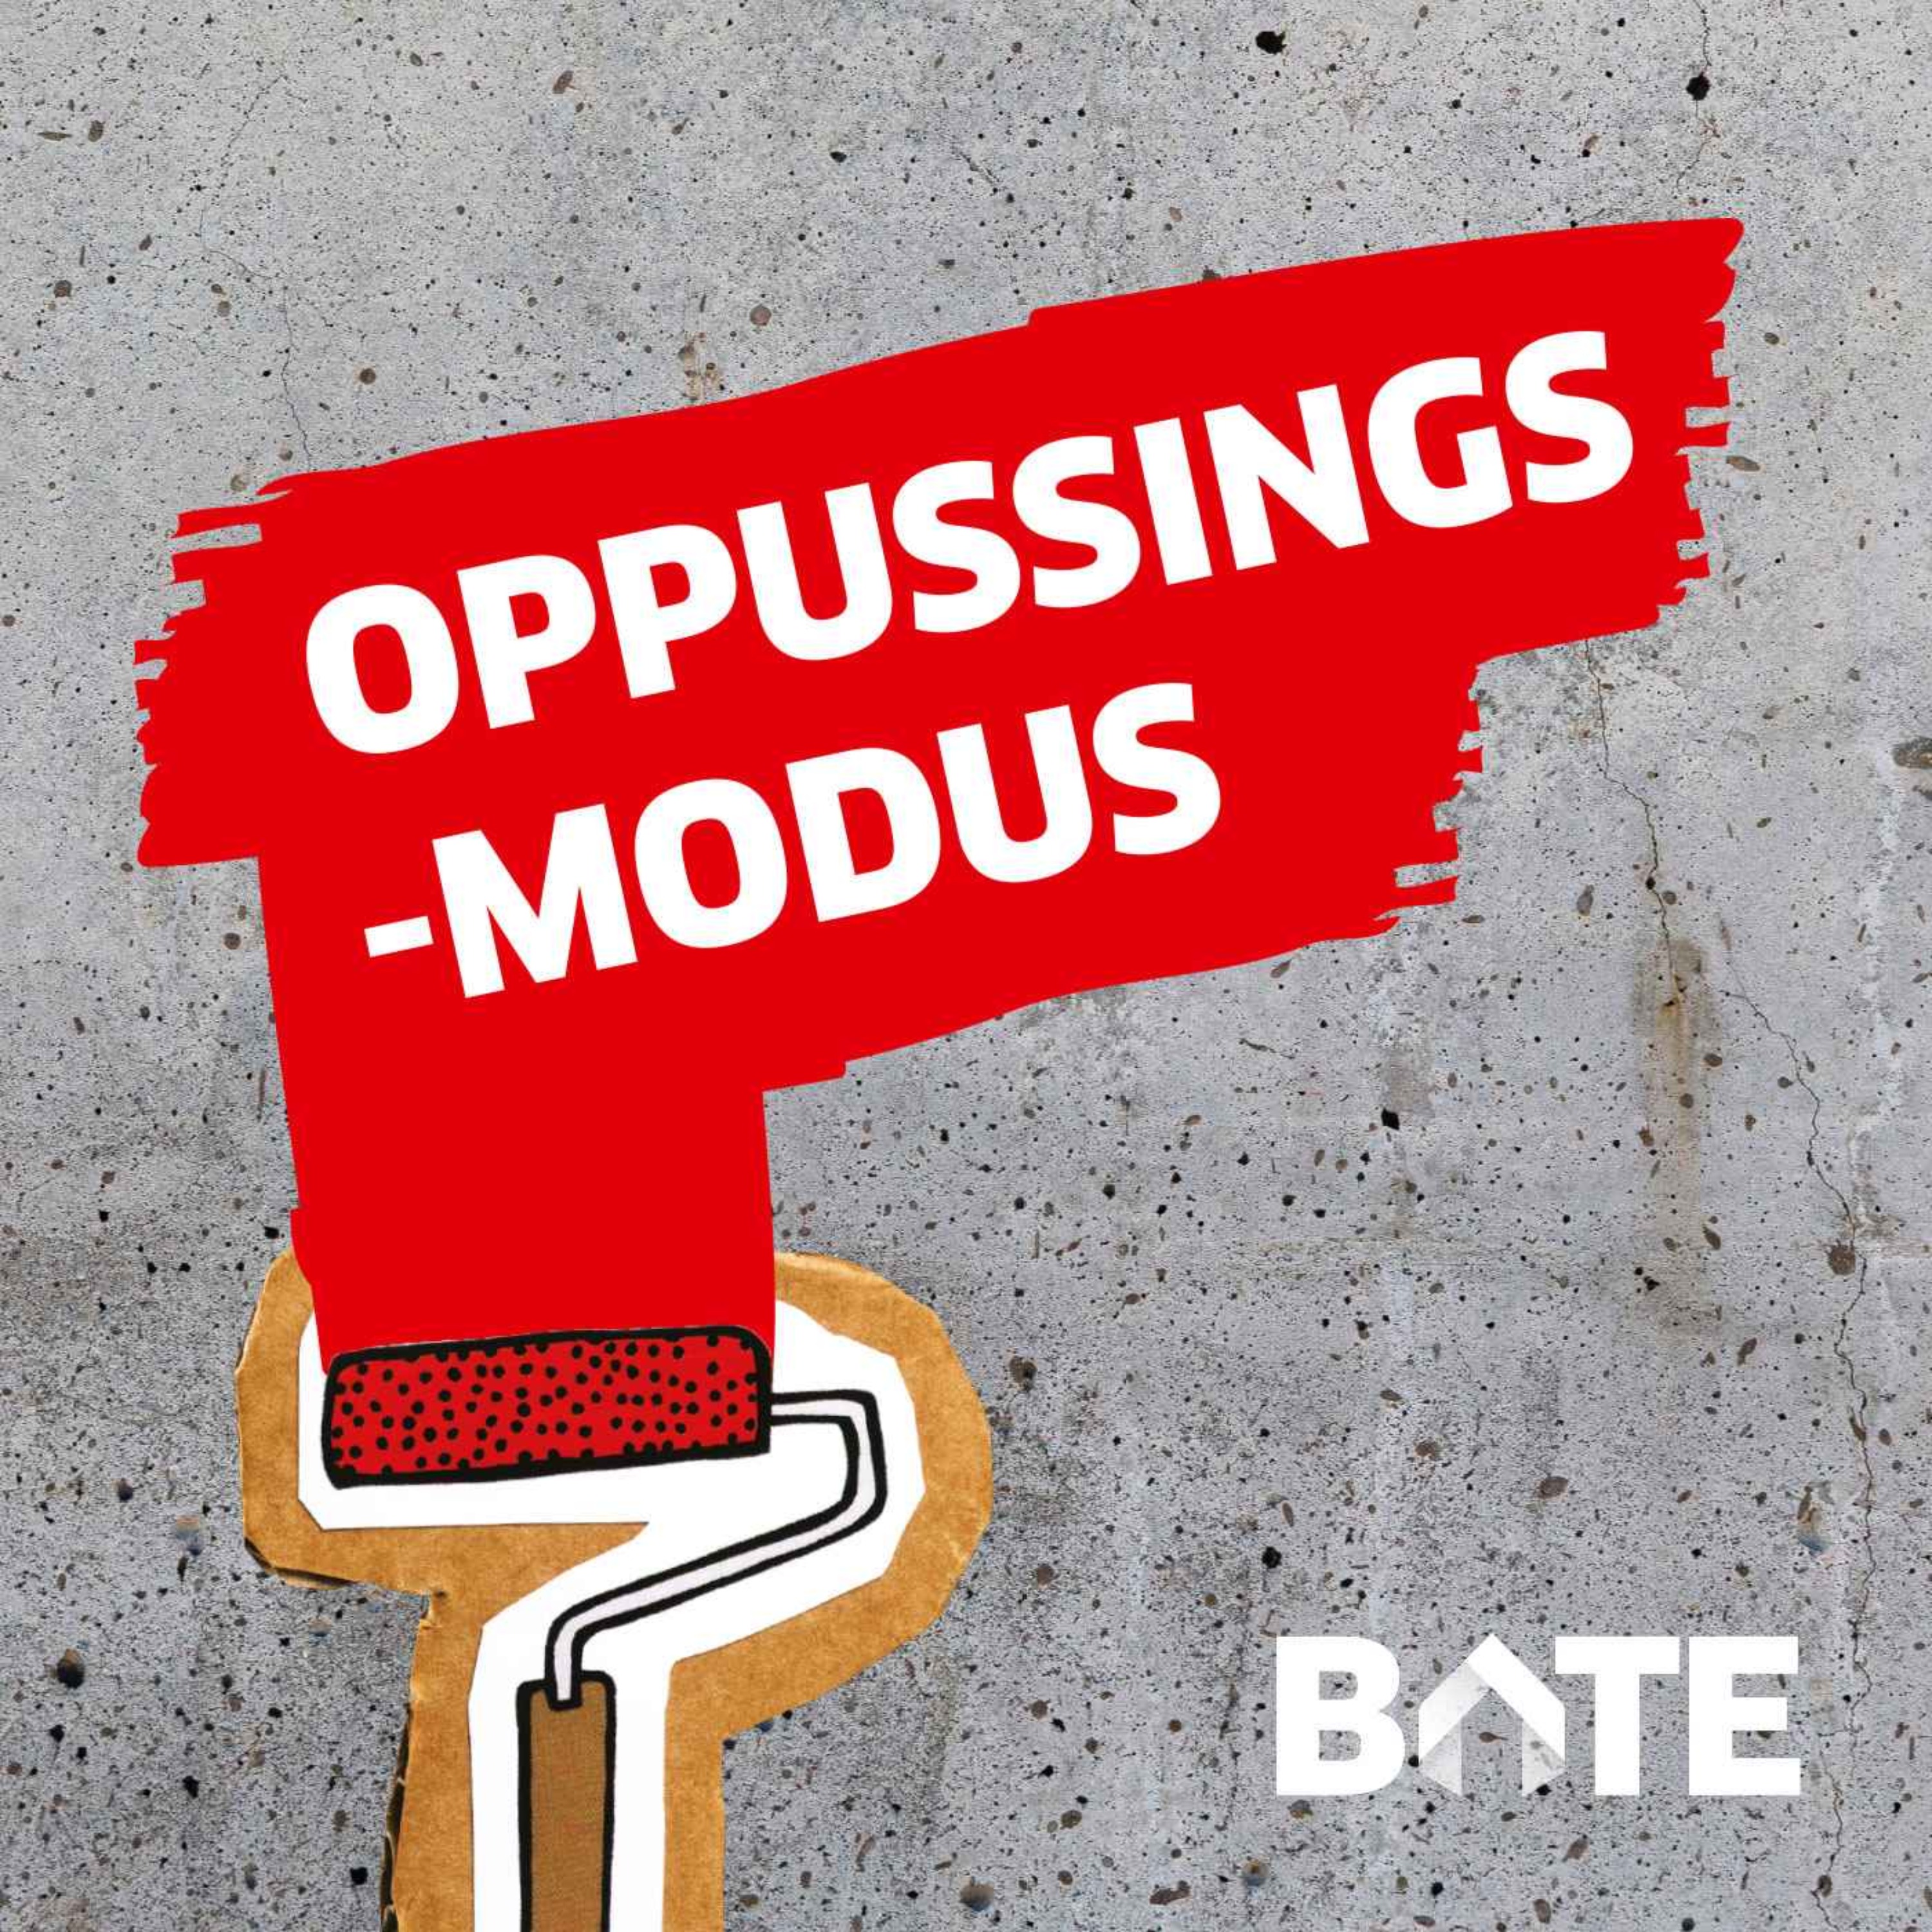 Oppussingsmodus